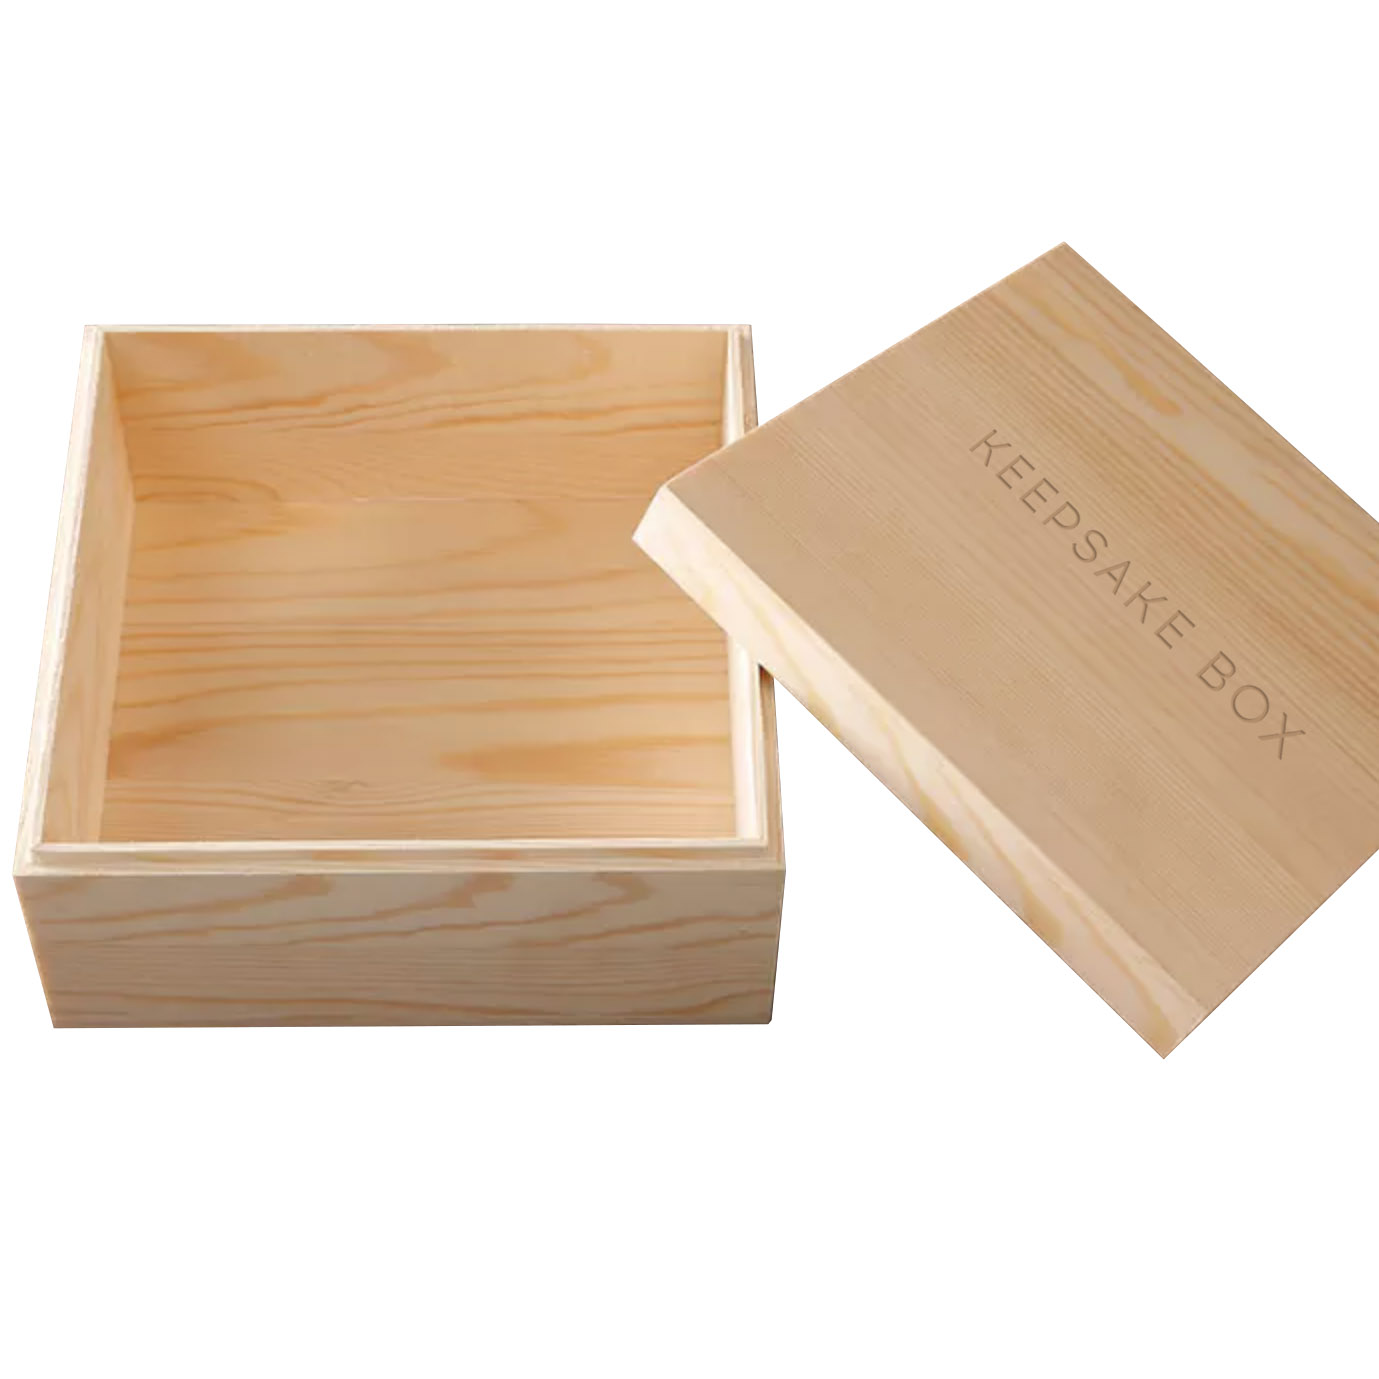 Personalized Wooden Box With Engraving Tree Wedding Gift Envelope Box  Baptism 